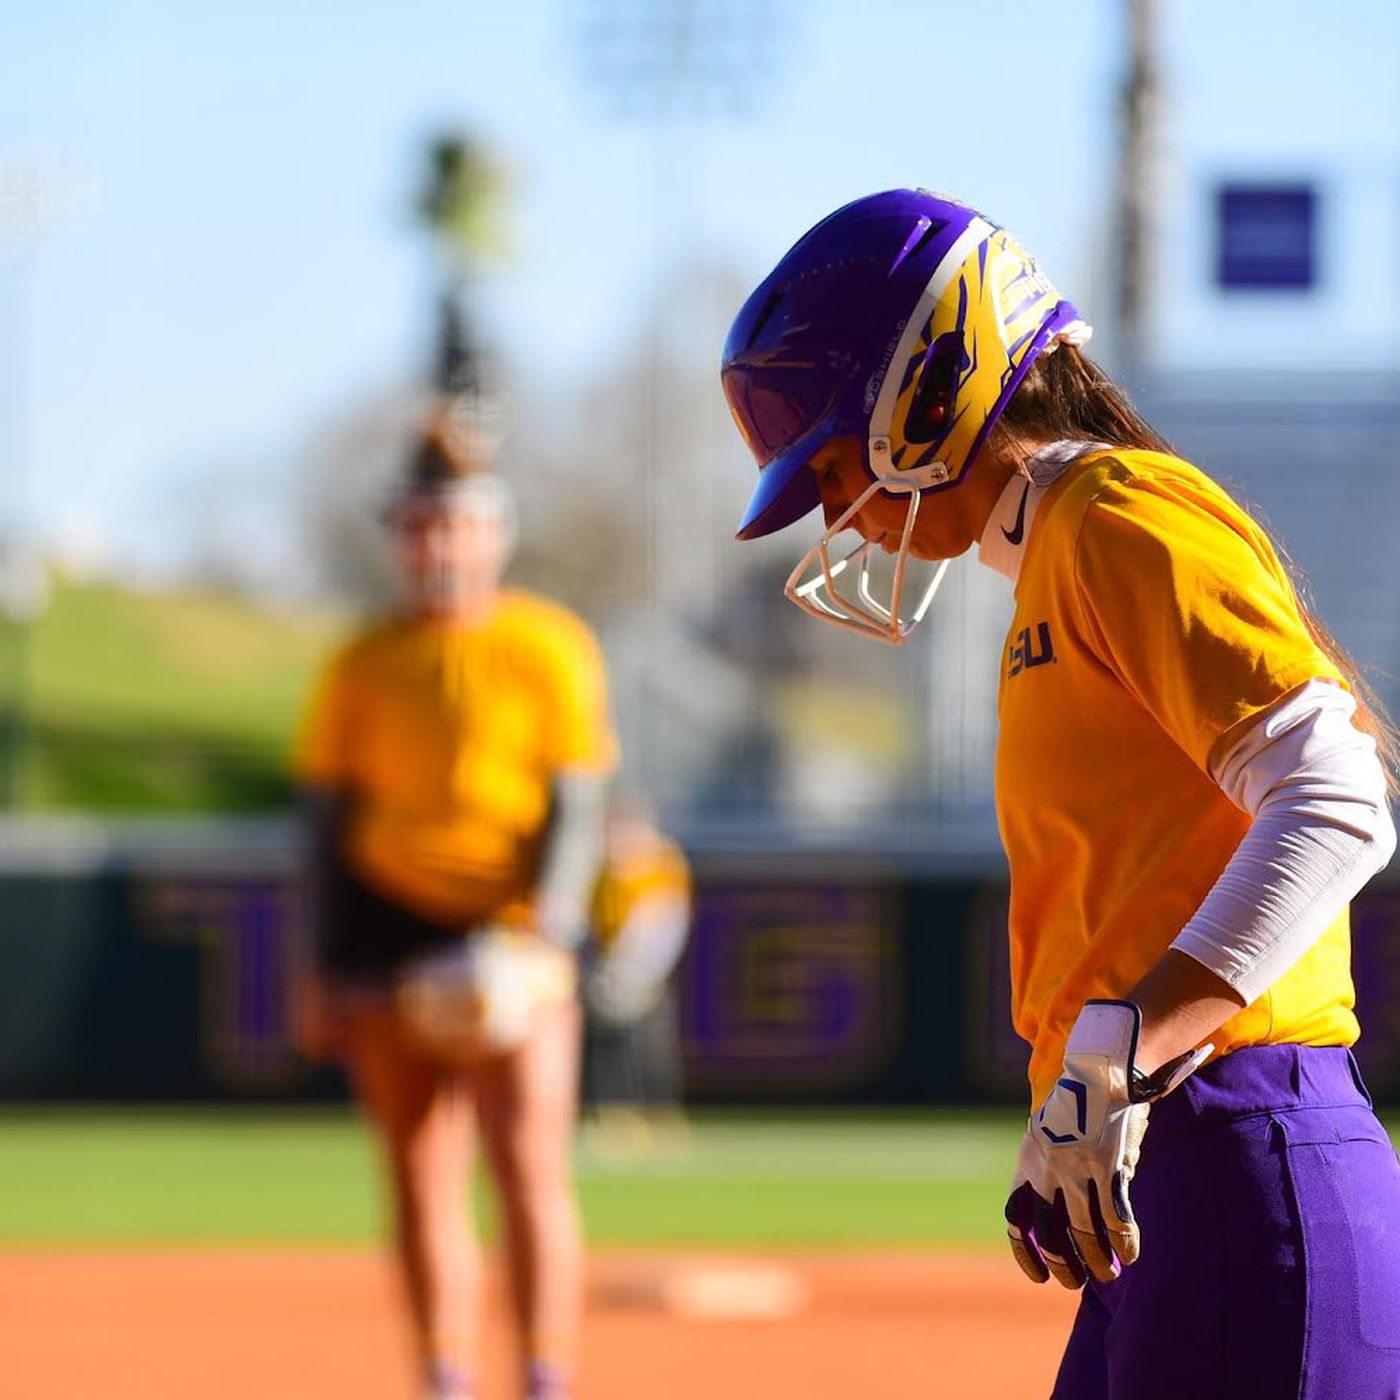 Lsu Softball 2022 Schedule 2022 Lsu Softball Preview: The Lineup - And The Valley Shook